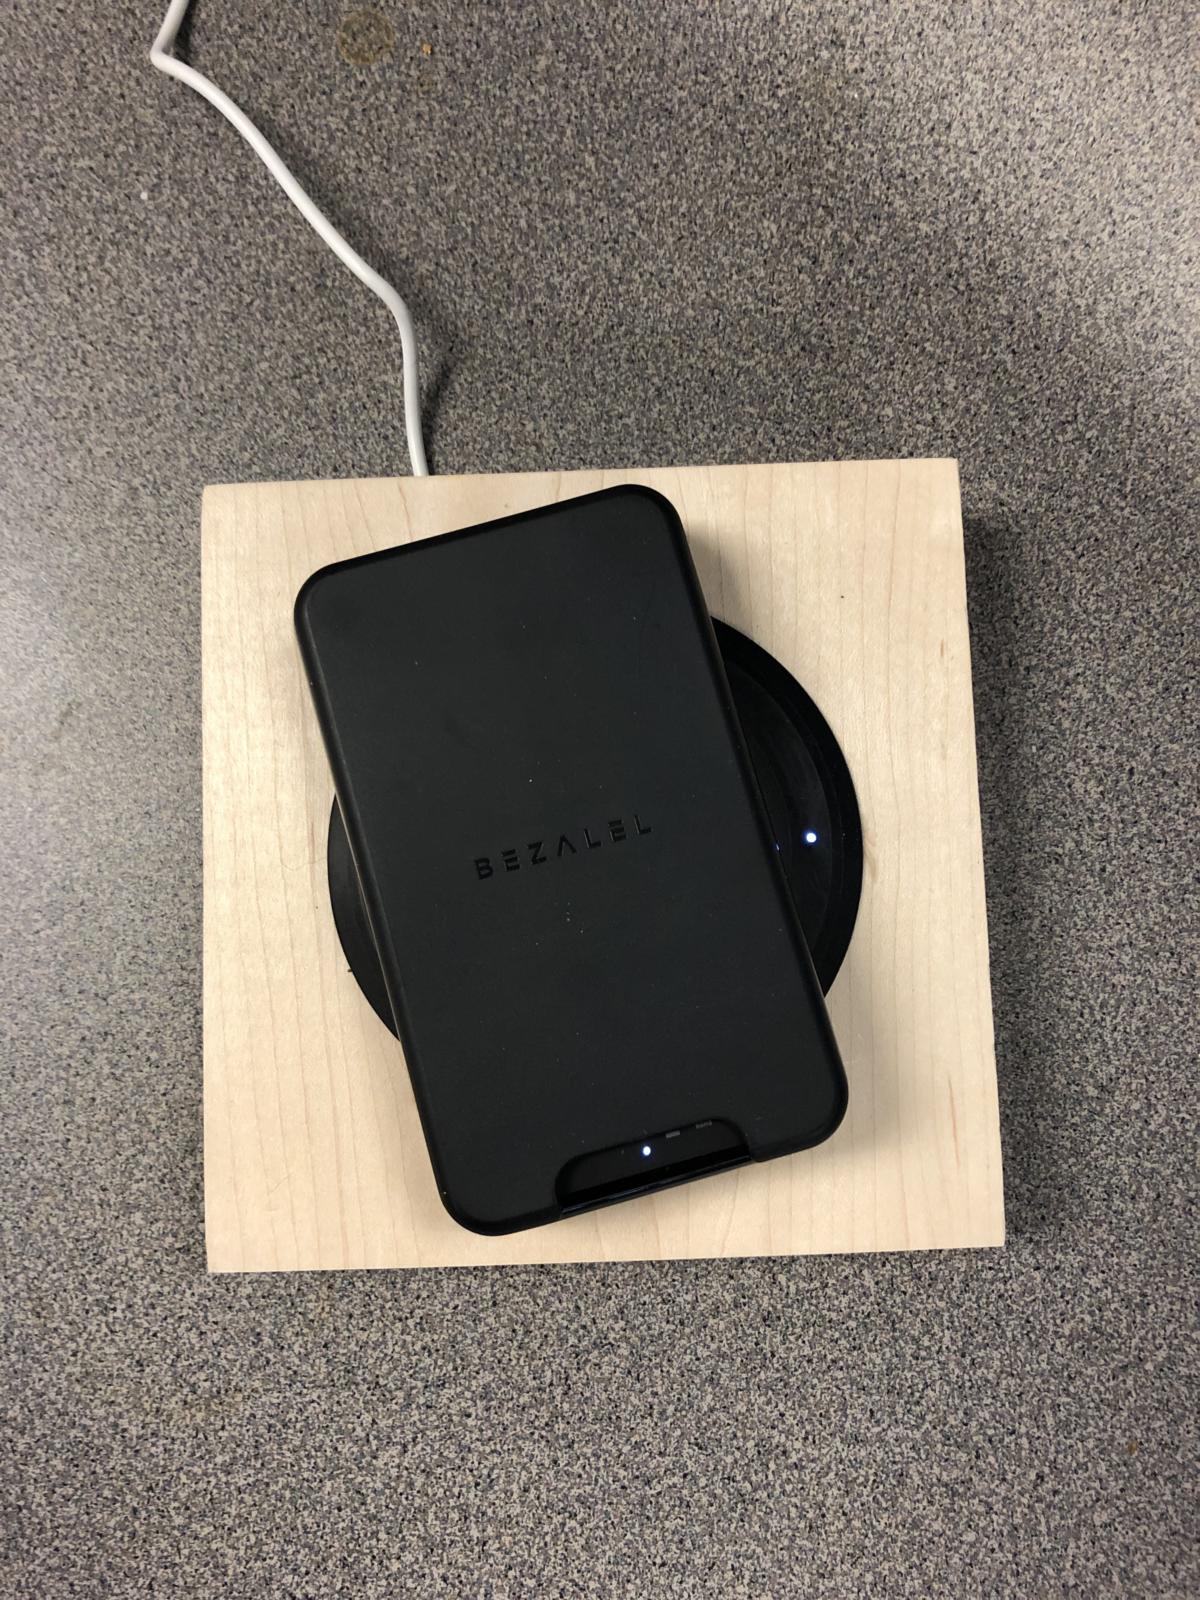 Prelude: Portable Wireless Charging with Zero Cables by BEZALEL —  Kickstarter